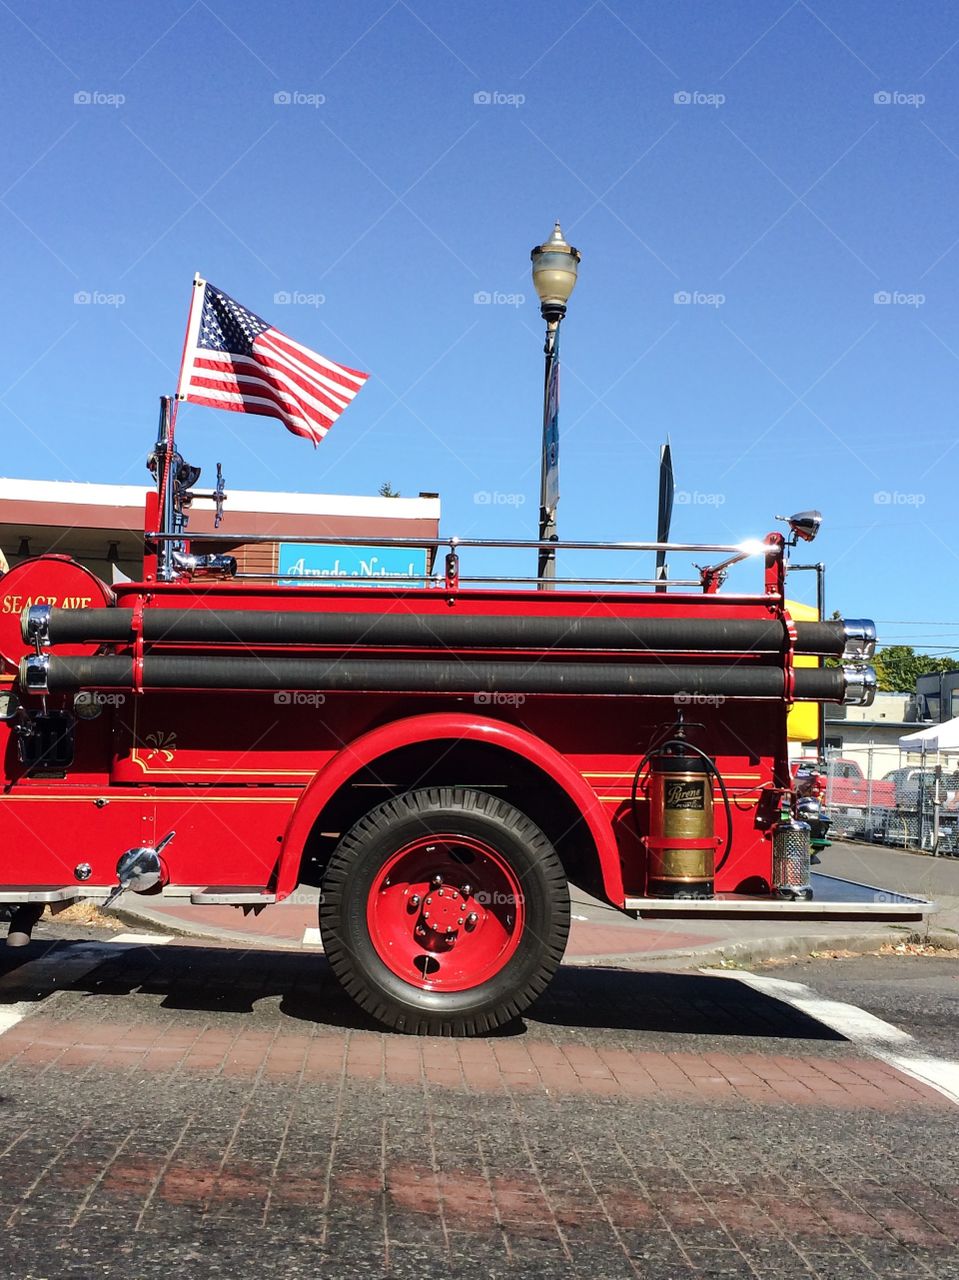 Fire trucks flies freedom. Classic fire truck displays American patriotism with American flag